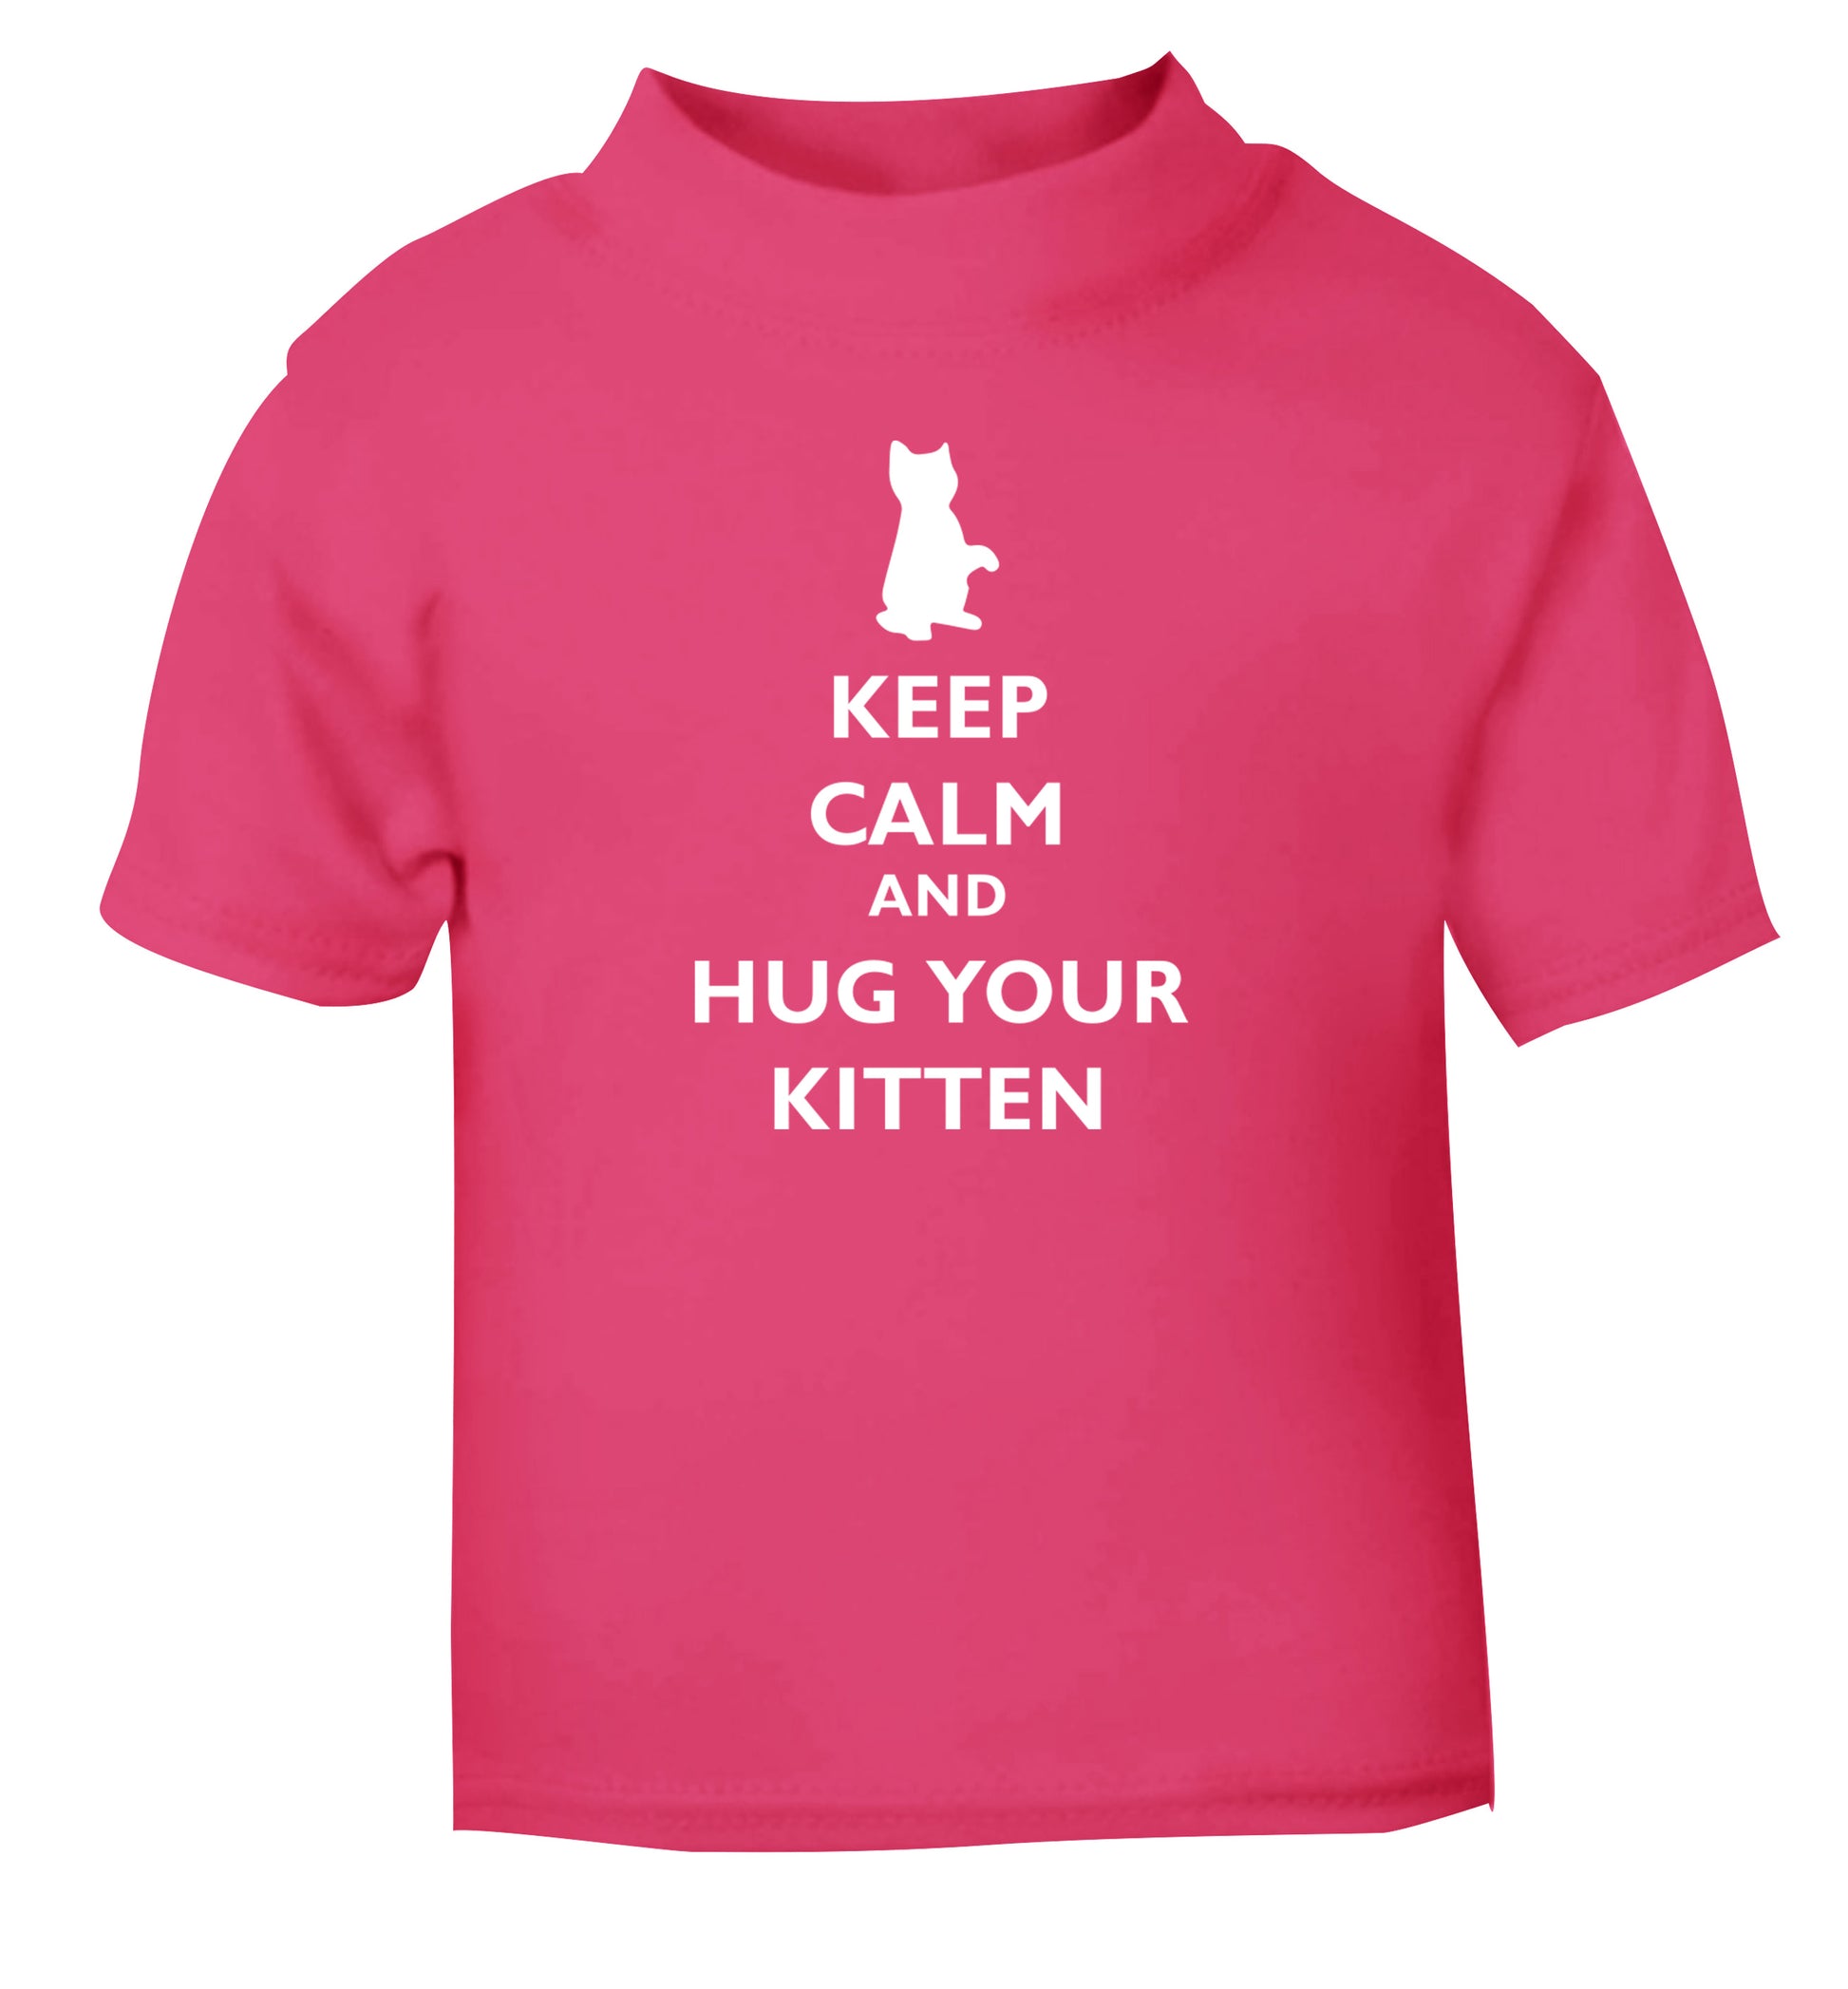 Keep calm and hug your kitten pink Baby Toddler Tshirt 2 Years